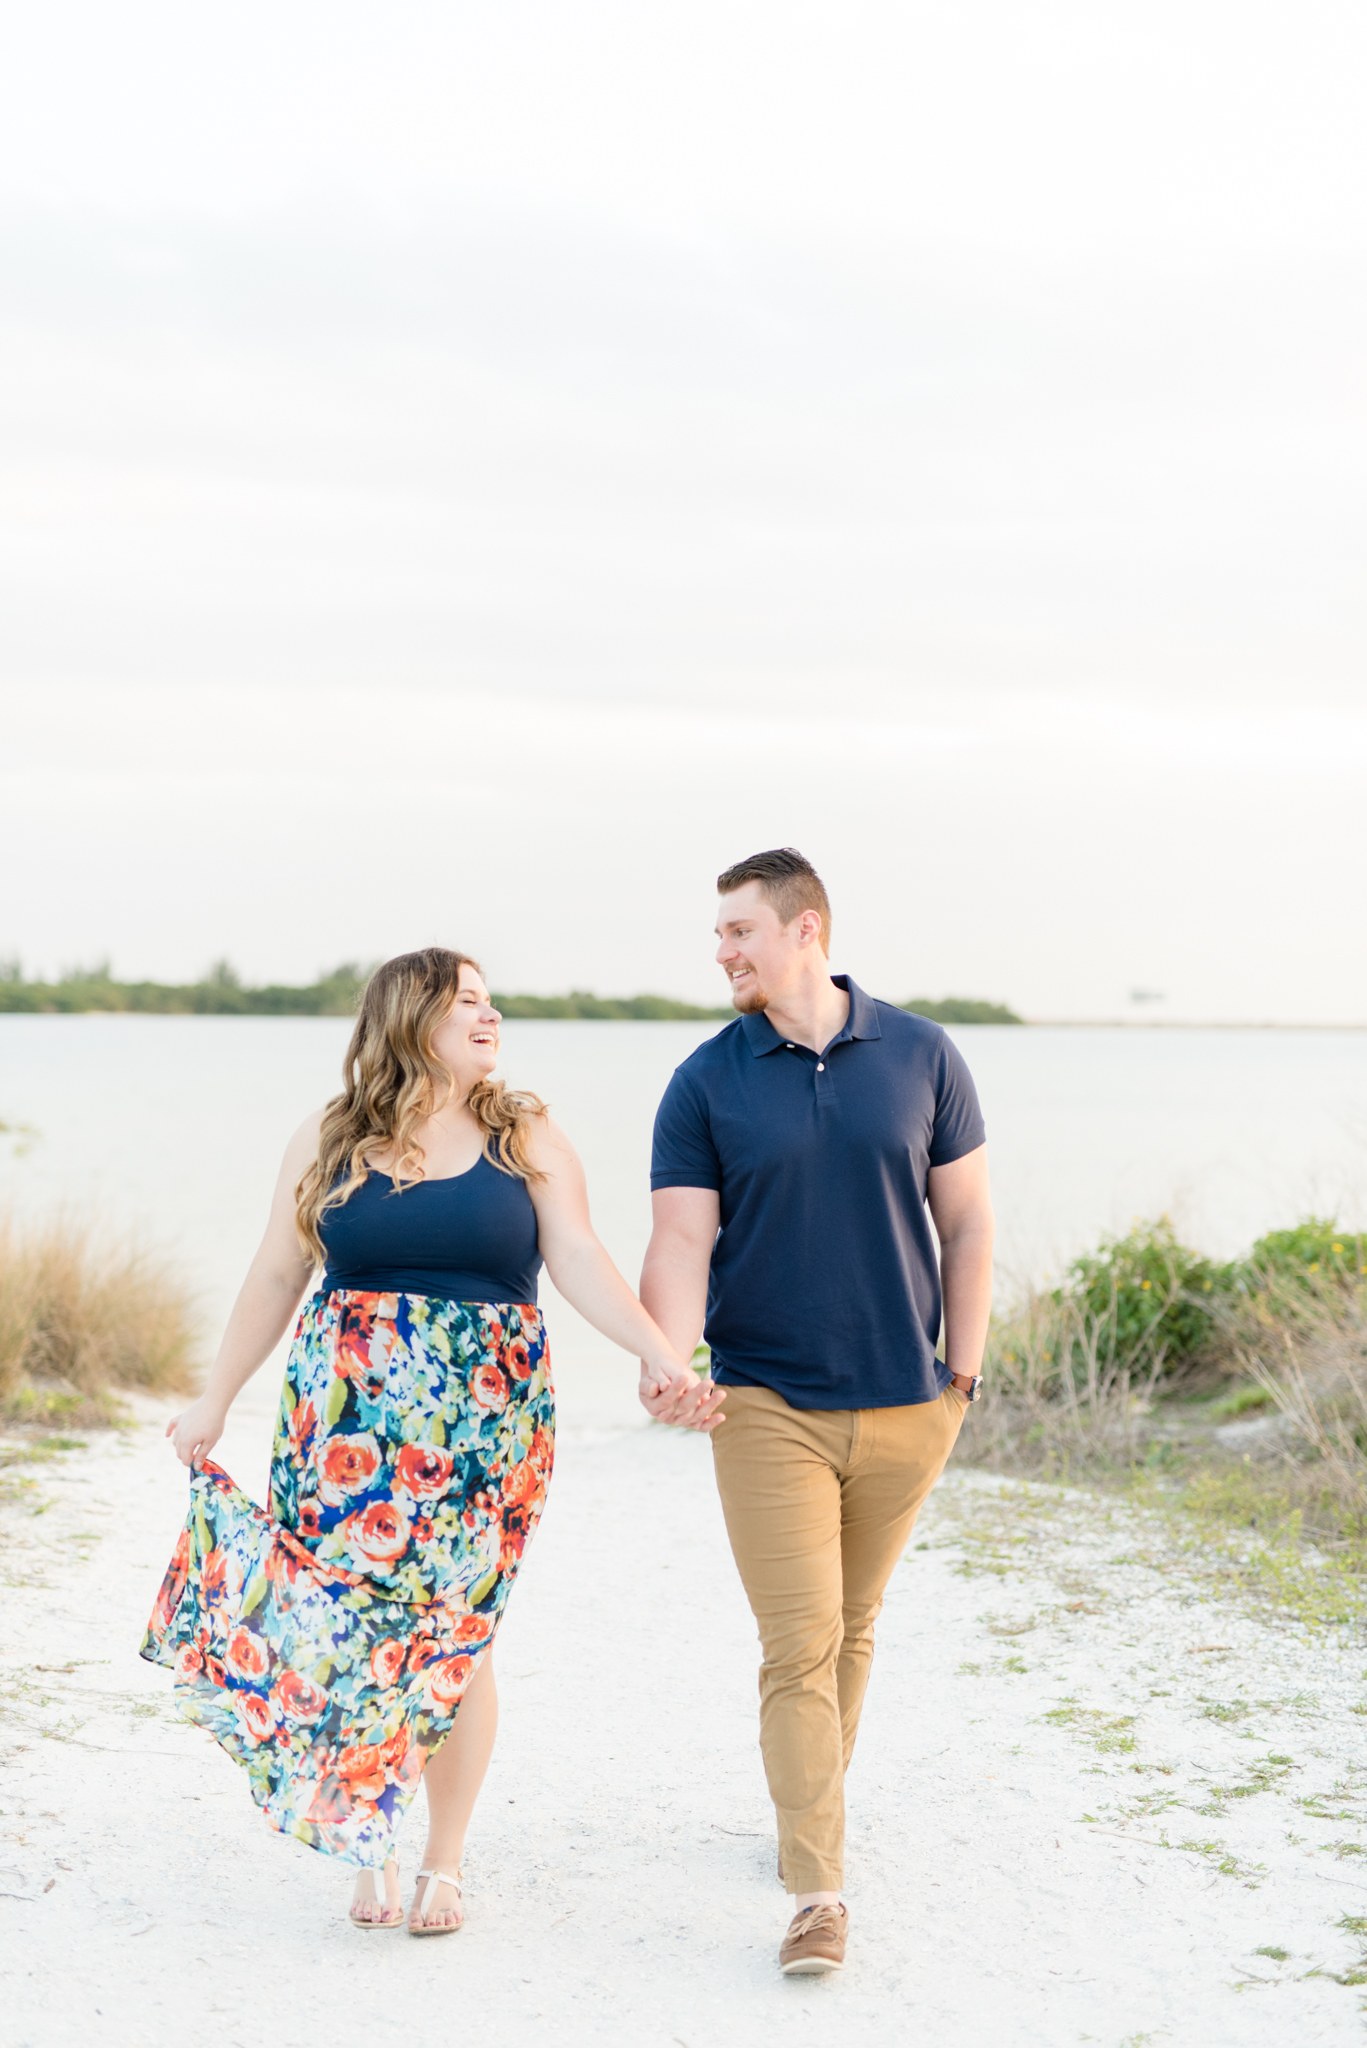 Couple laughs and walks on beach path.